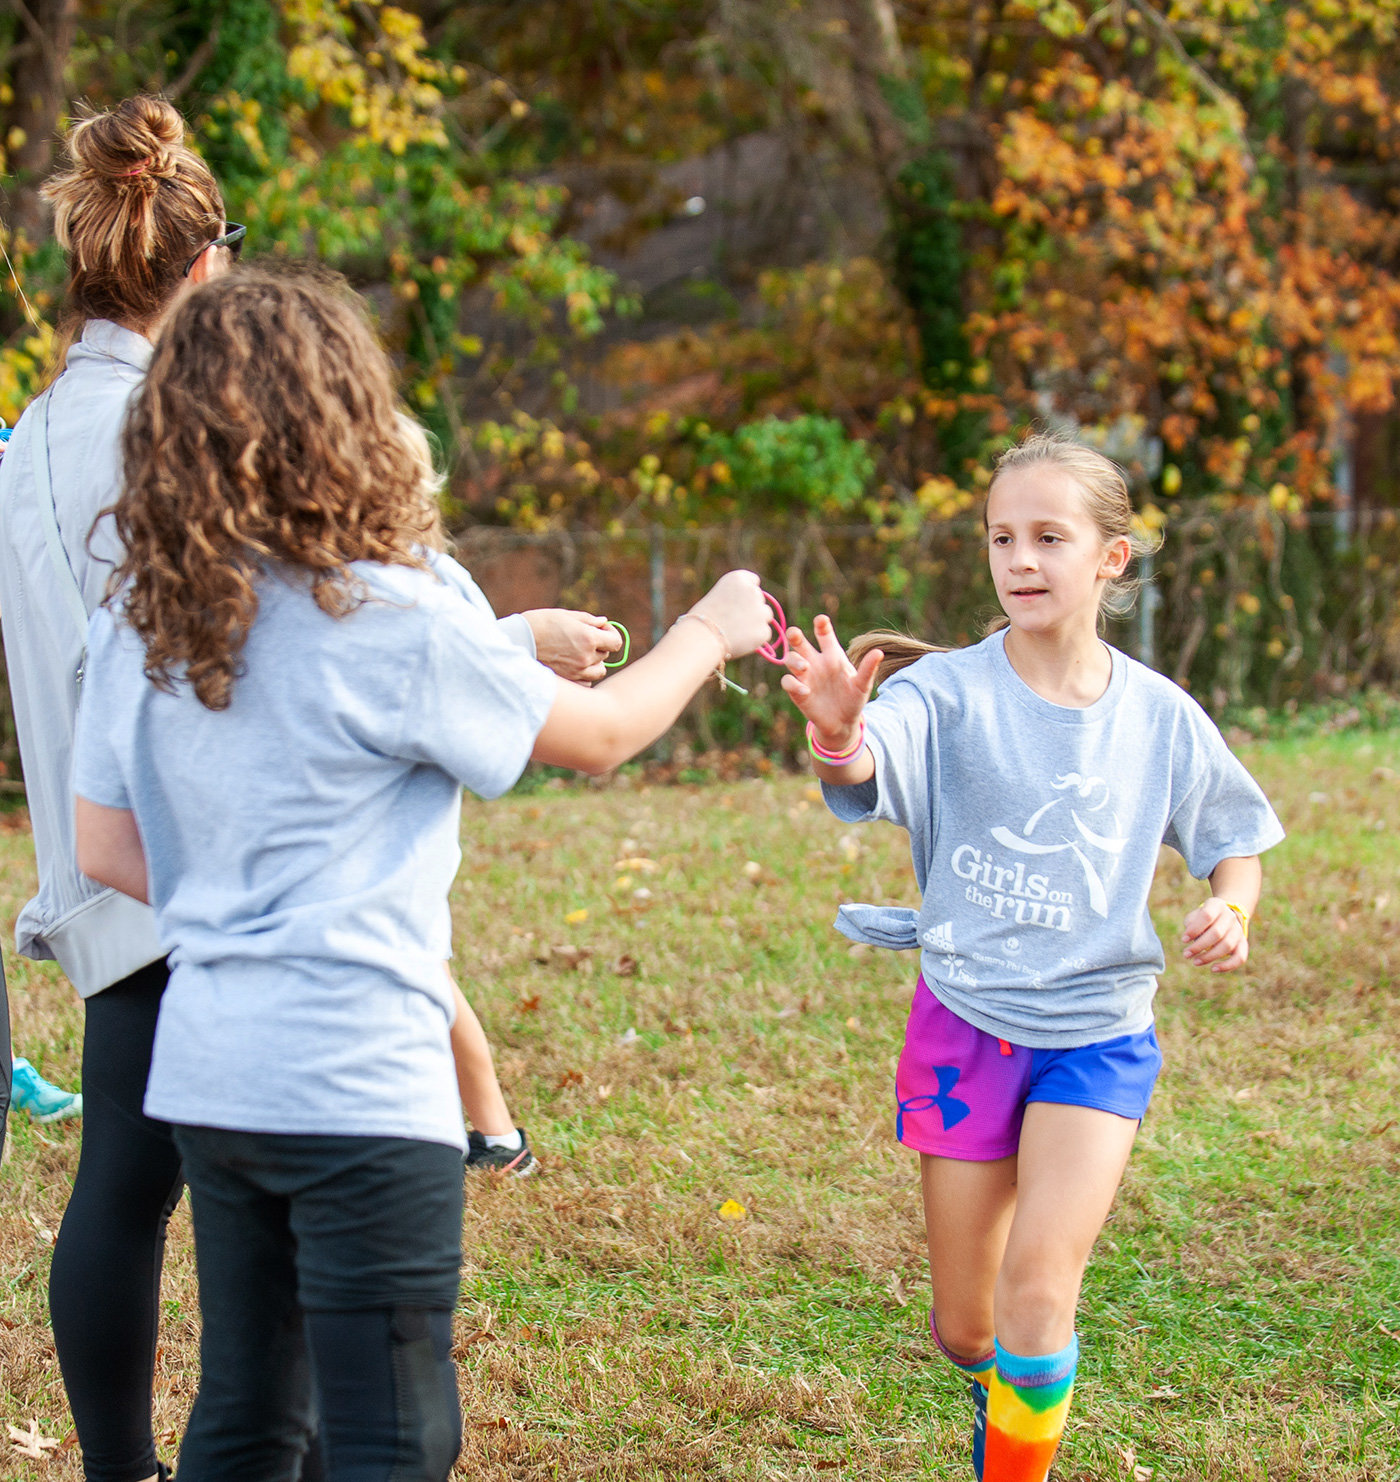 Parents gave Sloane DeCosmo bracelets as she completed a lap during a 5K at Oak Hill Elementary.